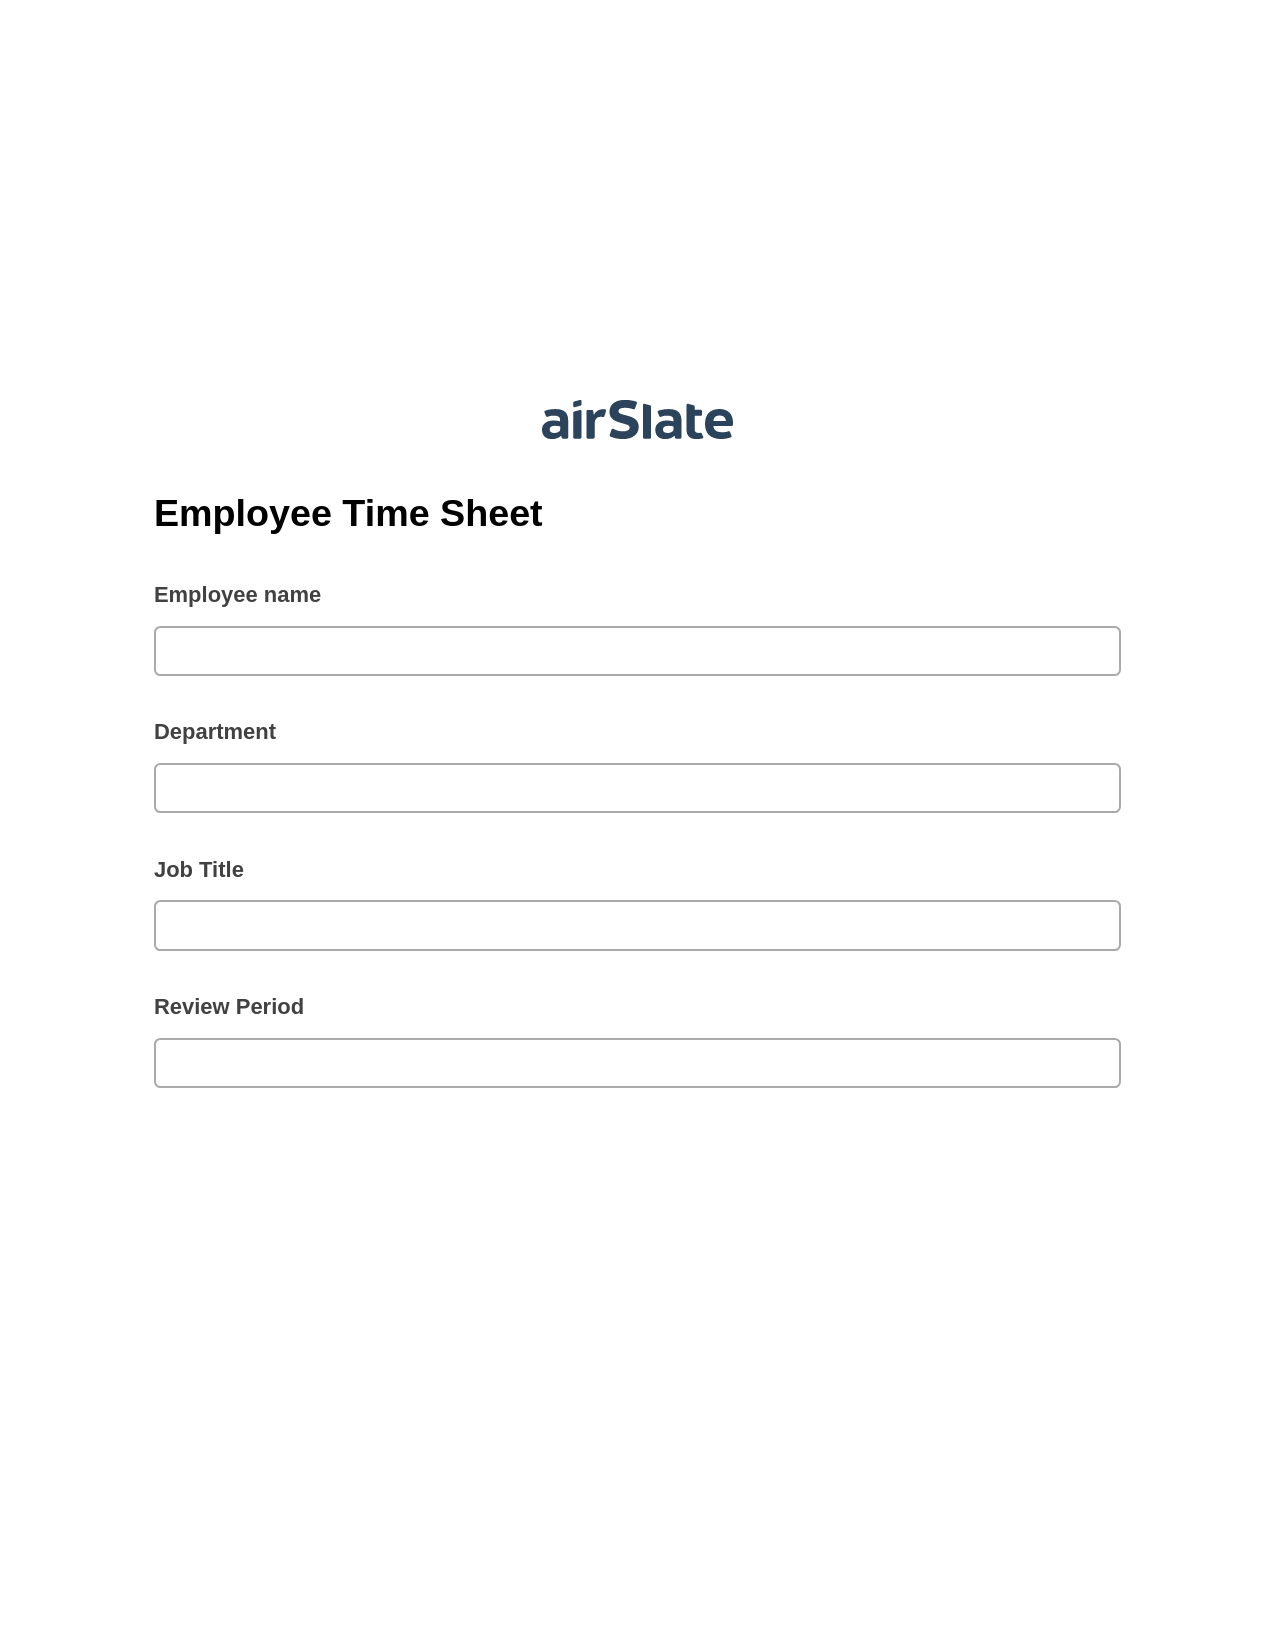 Employee Time Sheet Prefill from NetSuite records, Create Salesforce Records Bot, Archive to OneDrive Bot